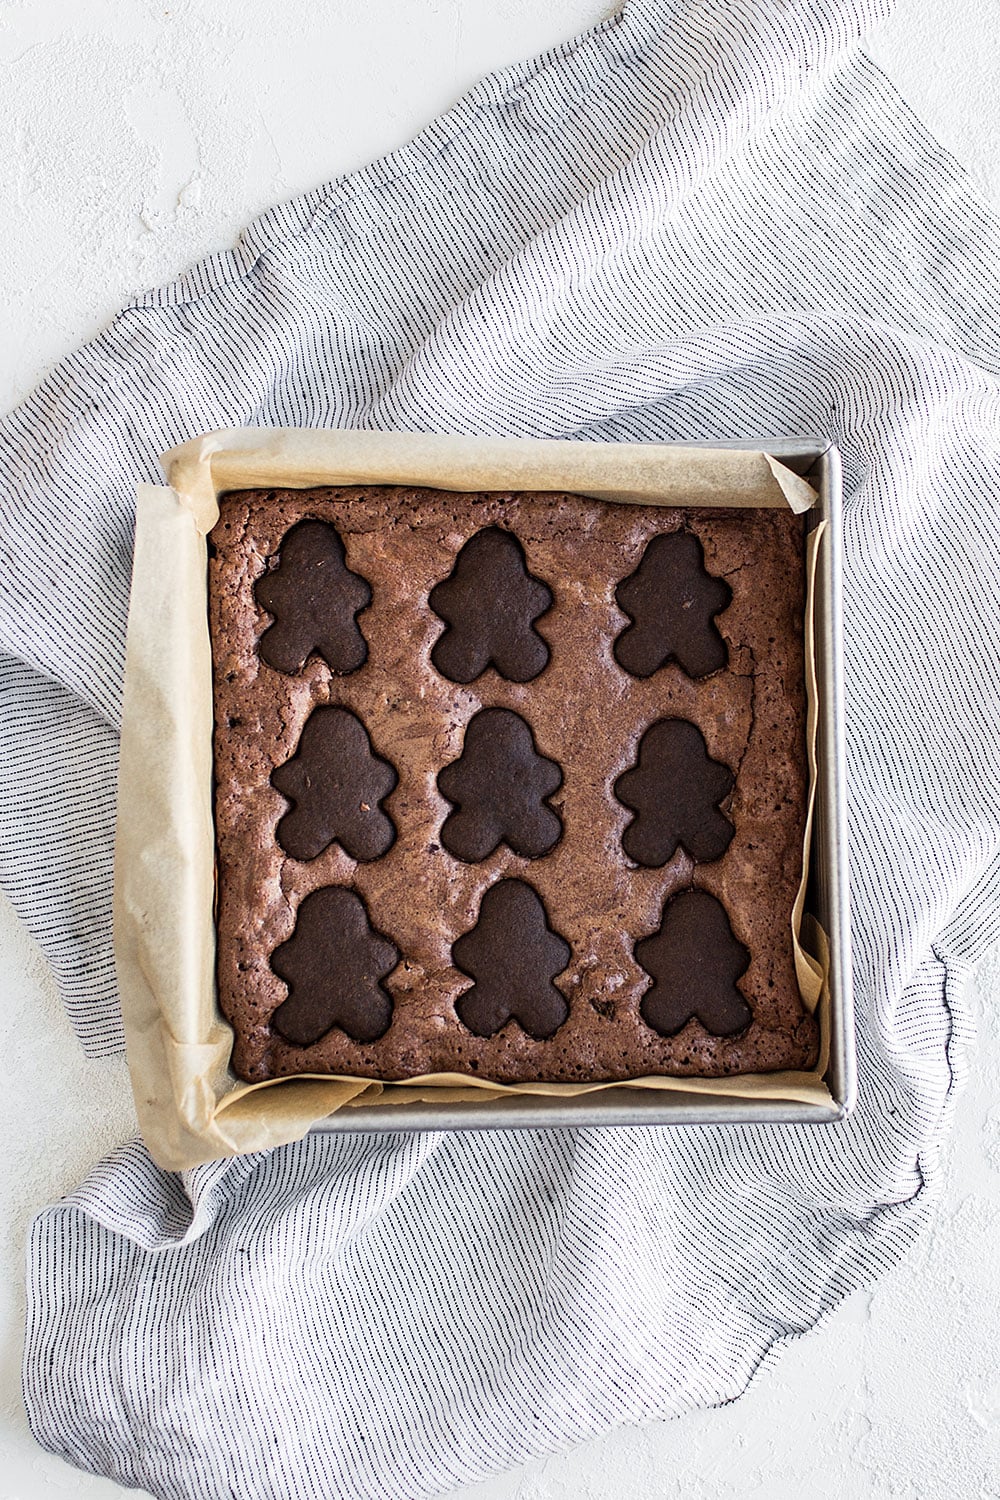 Gingerbread Brownies feature a thick and fudgy spiced brownie studded with crumbled gingerbread cookies and topped with adorable mini gingerbread men for a perfectly festive Christmas dessert!